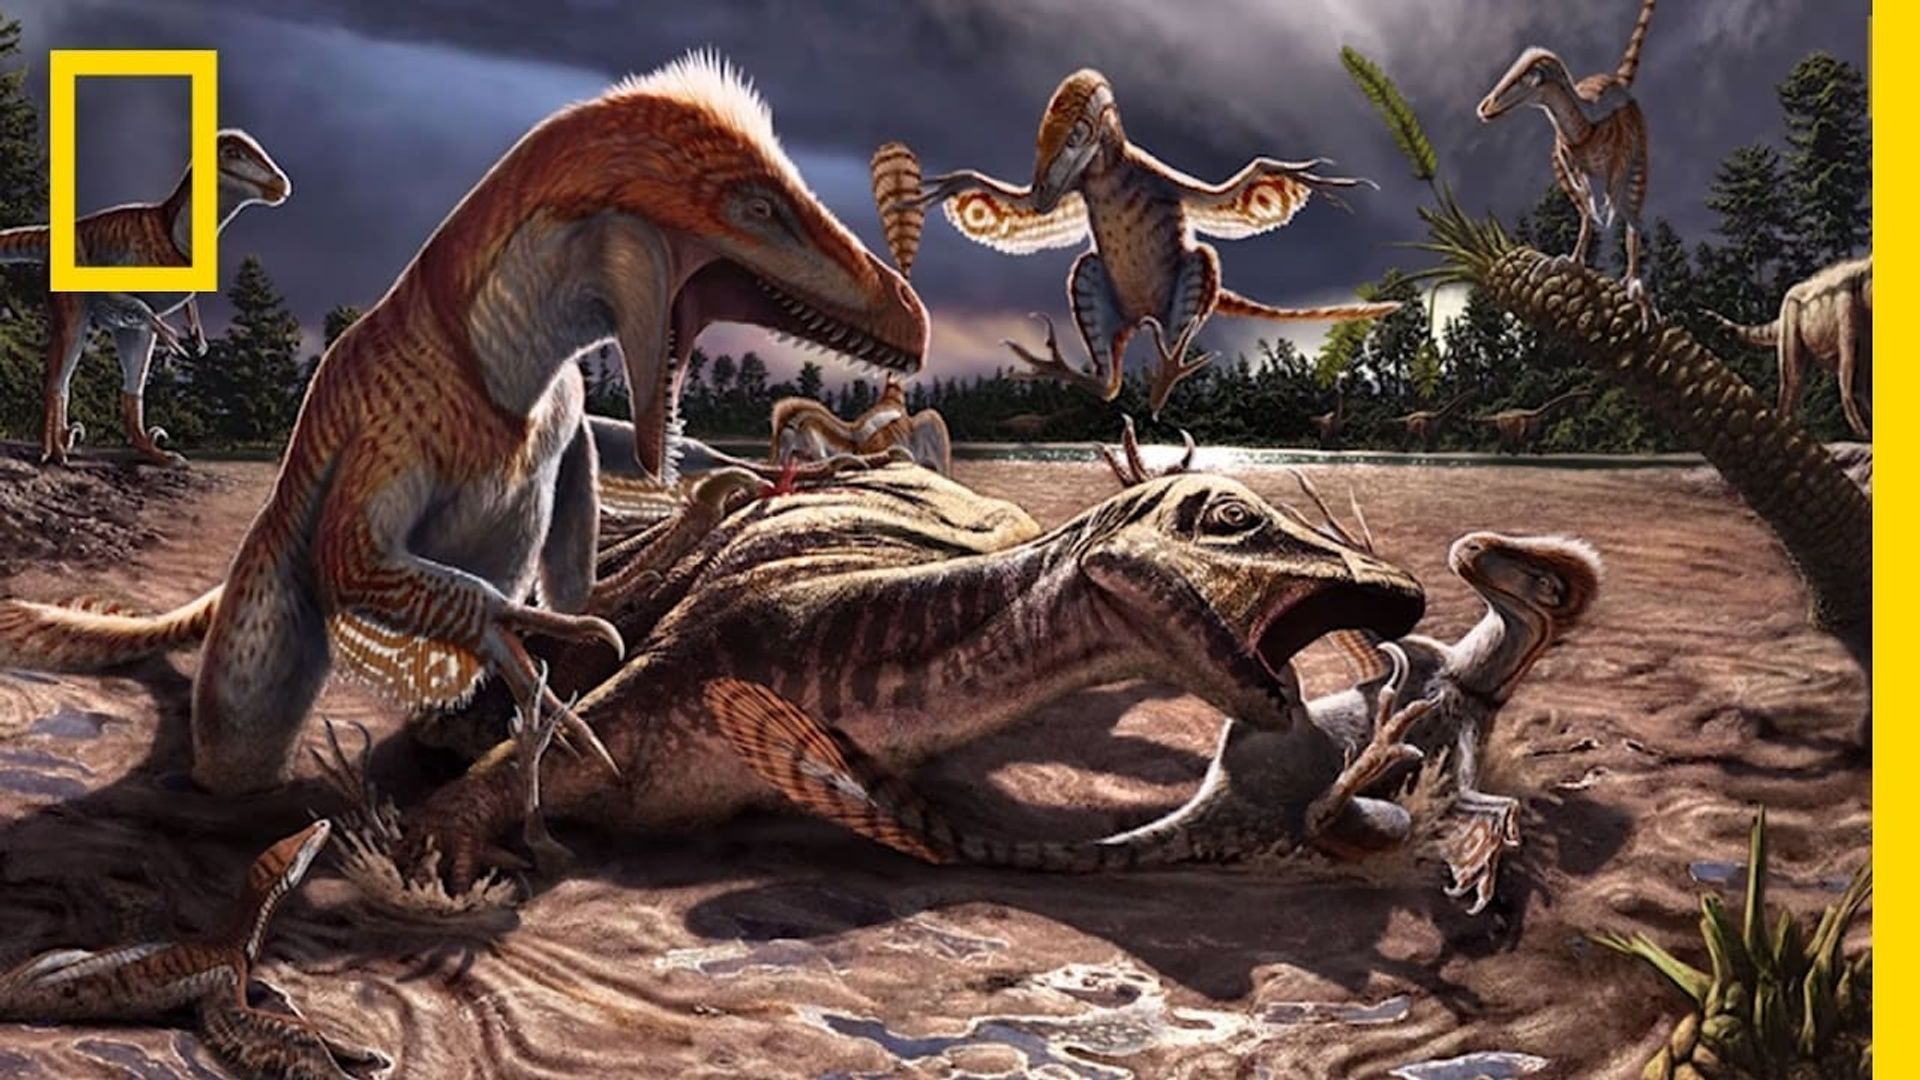 National Geographic: Dino Death Trap background